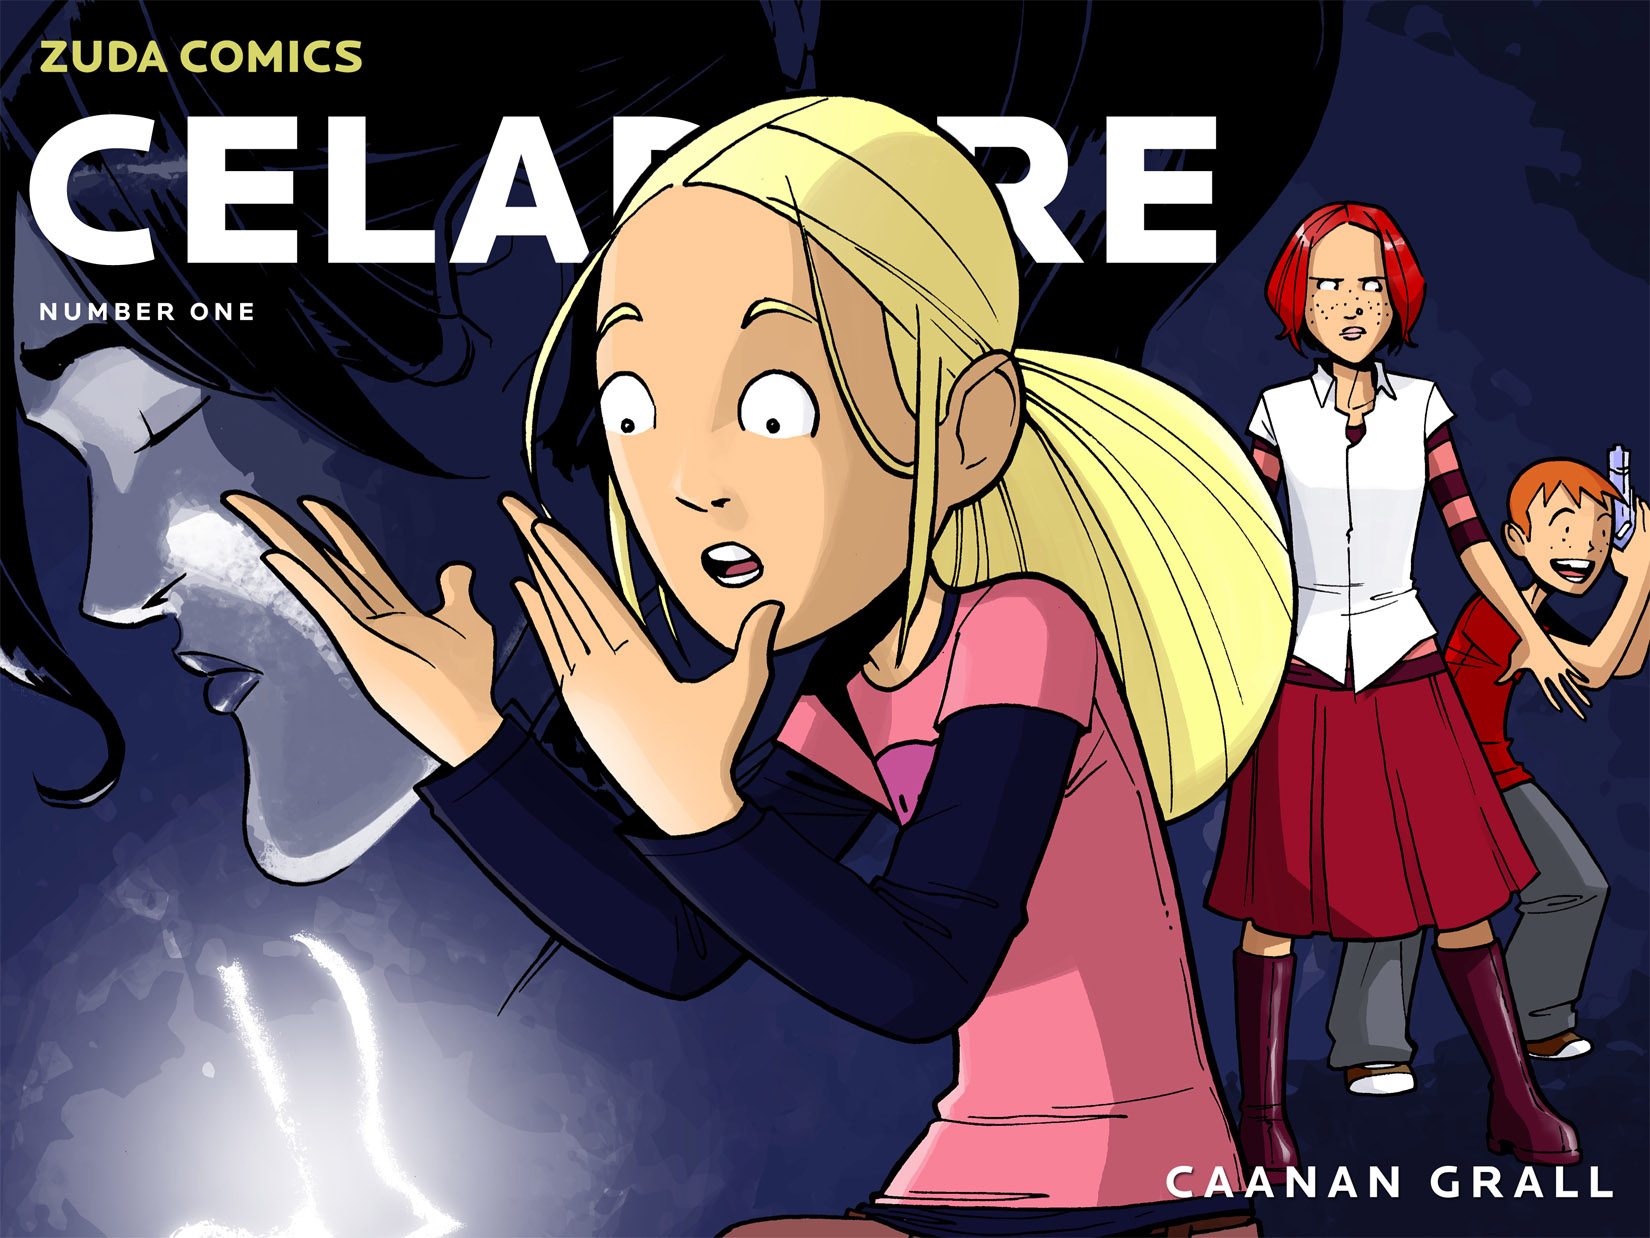 Read online Celadore comic -  Issue #1 - 1